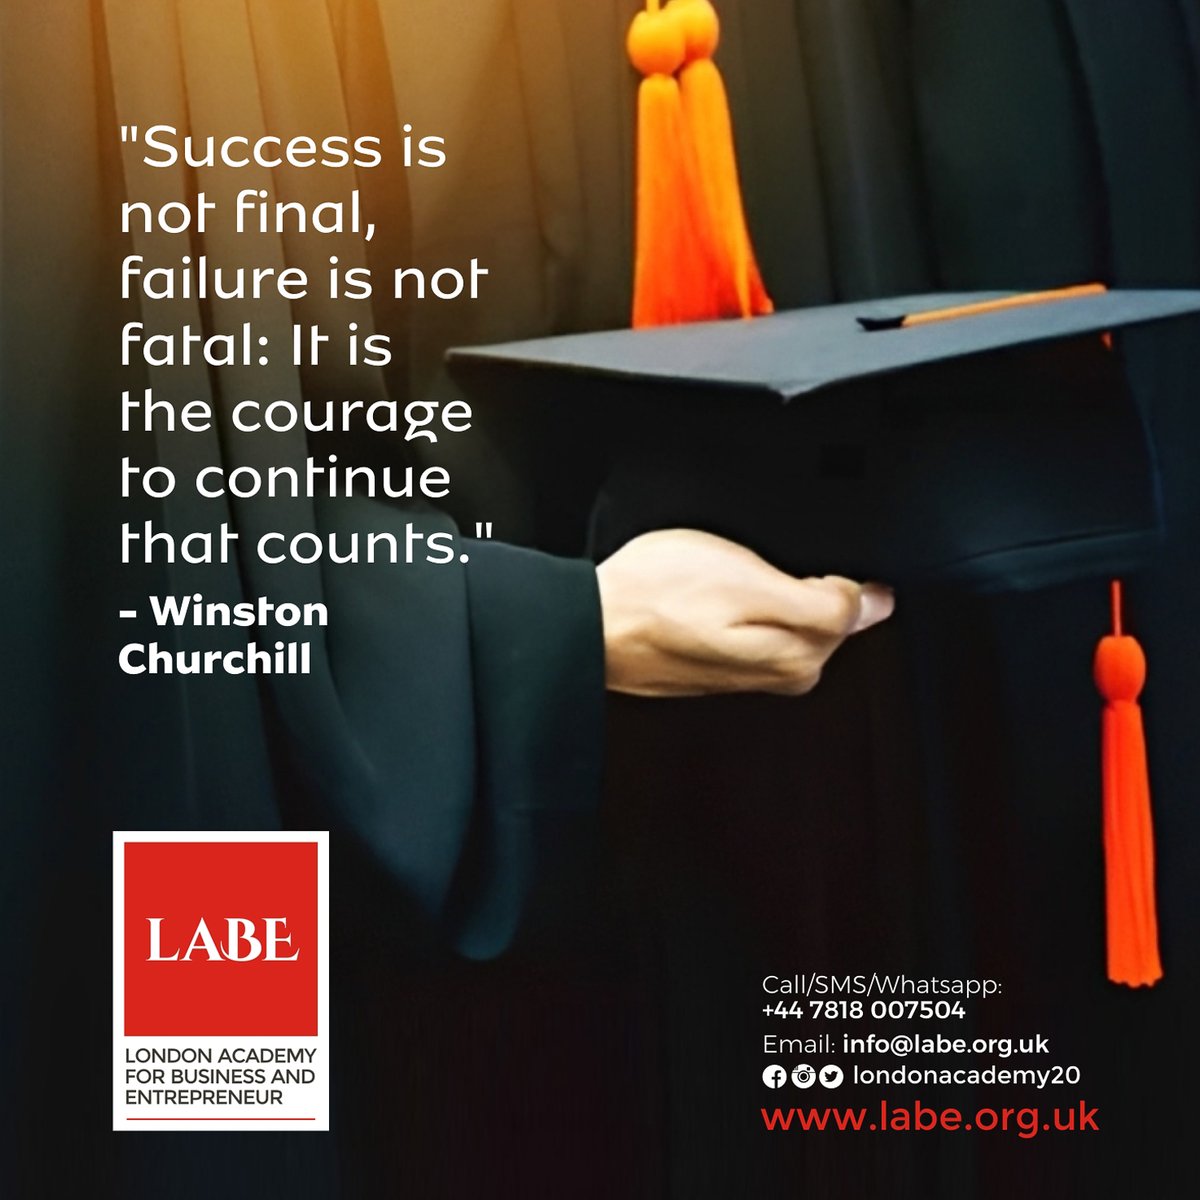 'Success is not final, failure is not fatal: It is the courage to continue that counts.' - Winston Churchill

#labe 
#londonacademy 
#businessmindset 
#successtips 
#entrepreneurship 
#digitalprojectmanager 
#businessanalyst